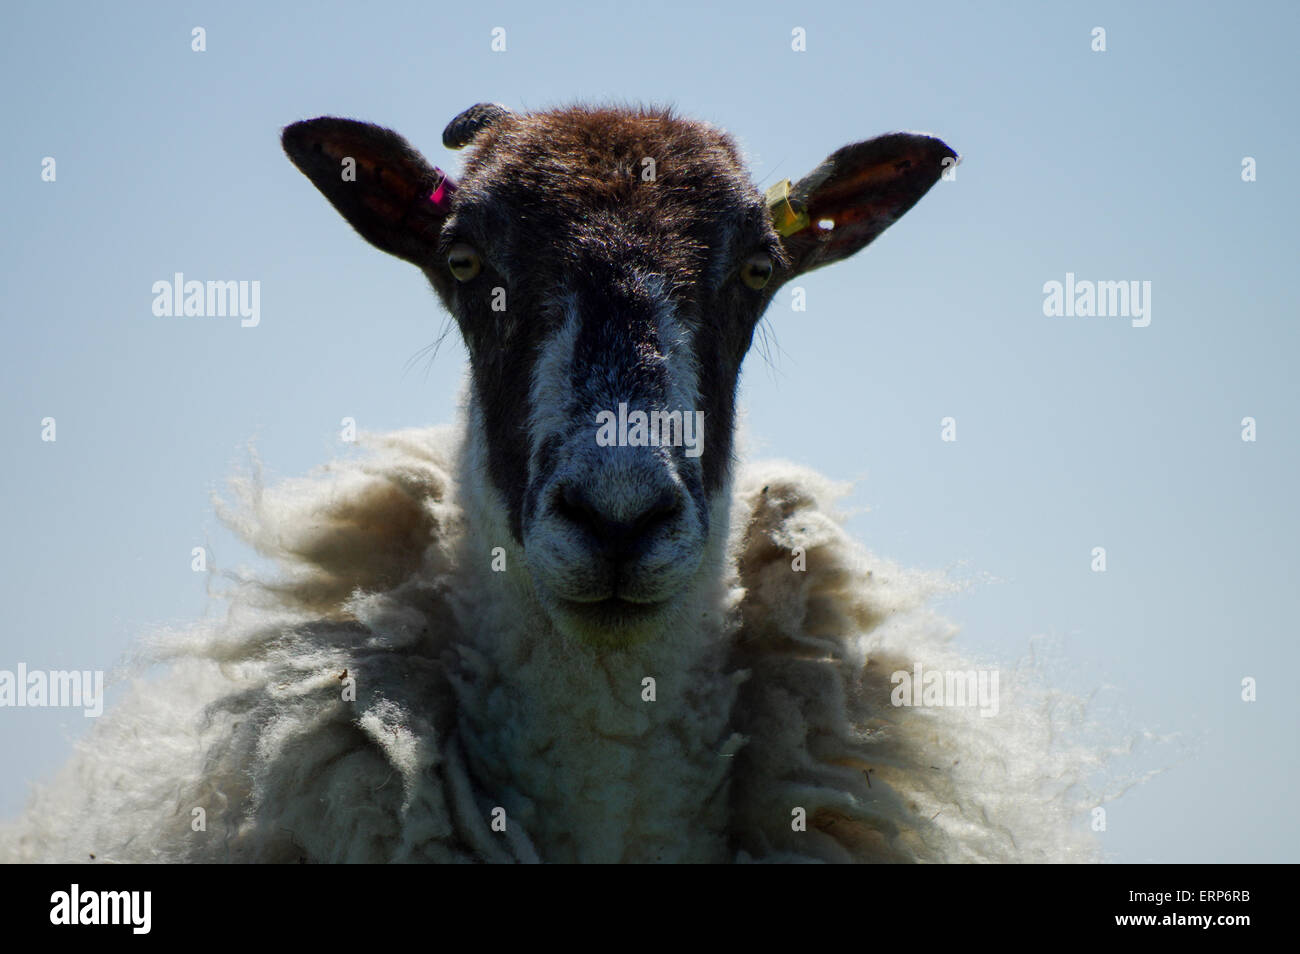 Portrait of a sheep Stock Photo